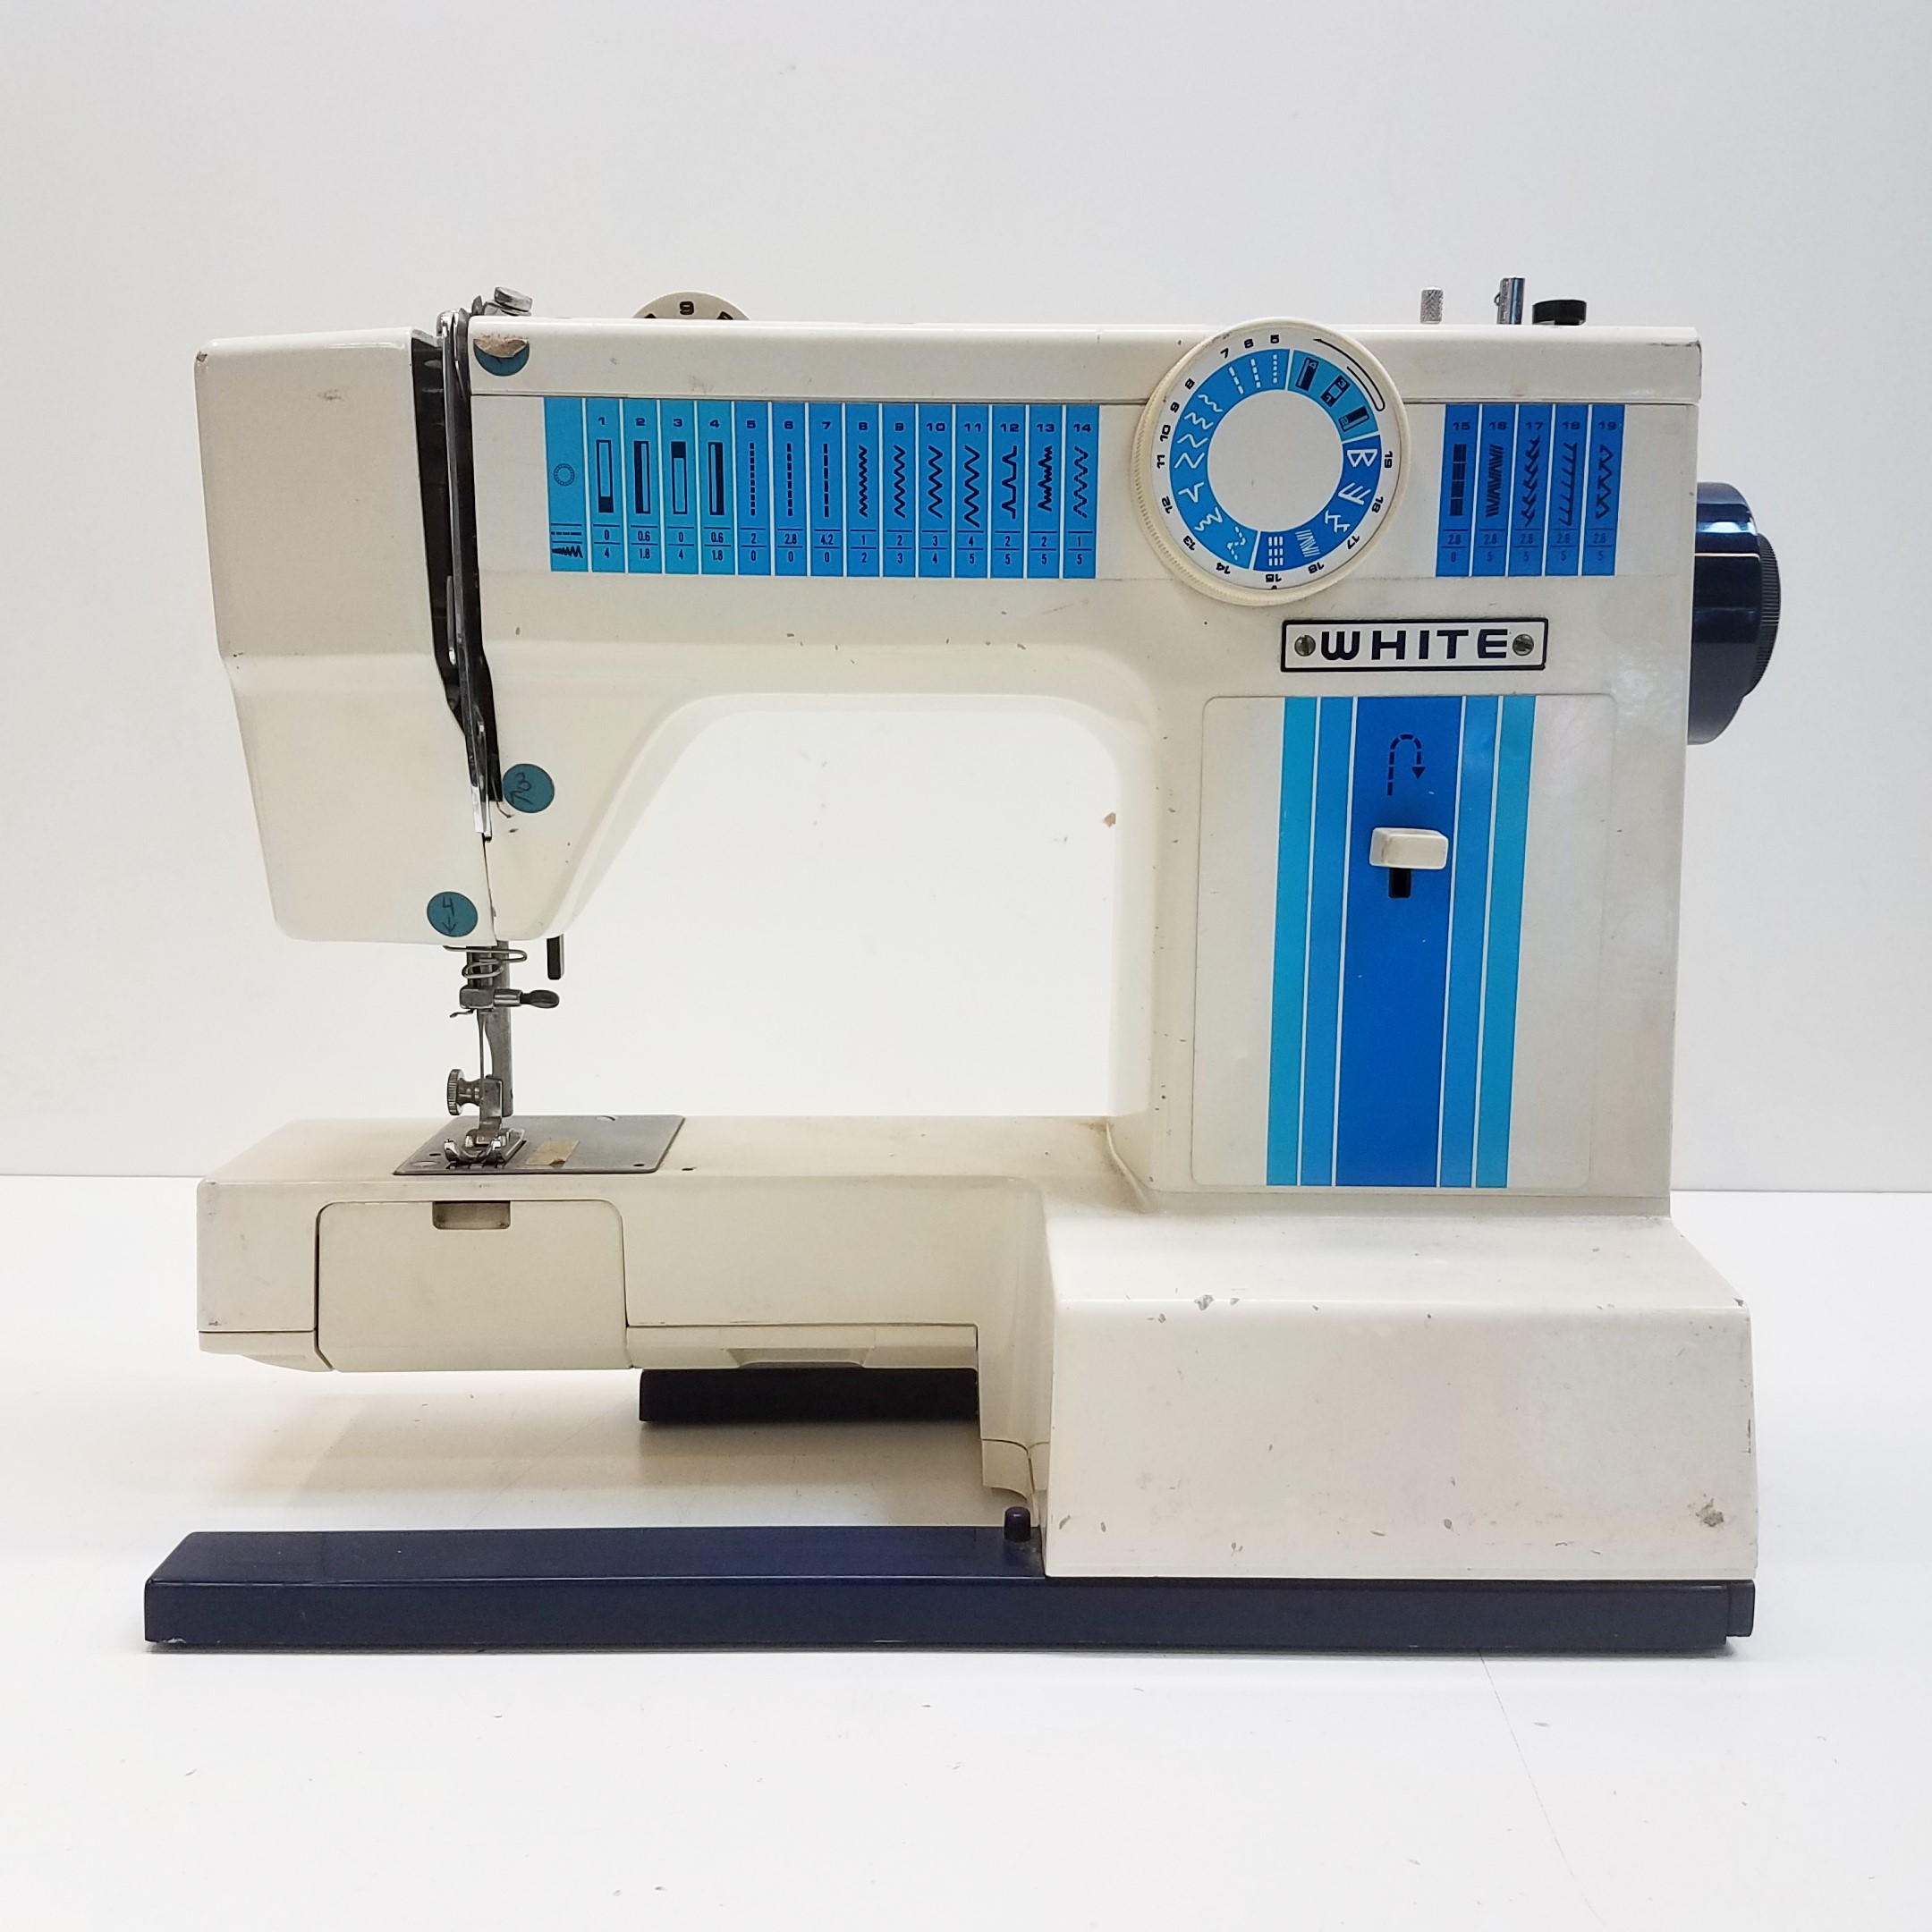 White 1510 Sewing Machine review by miss diana